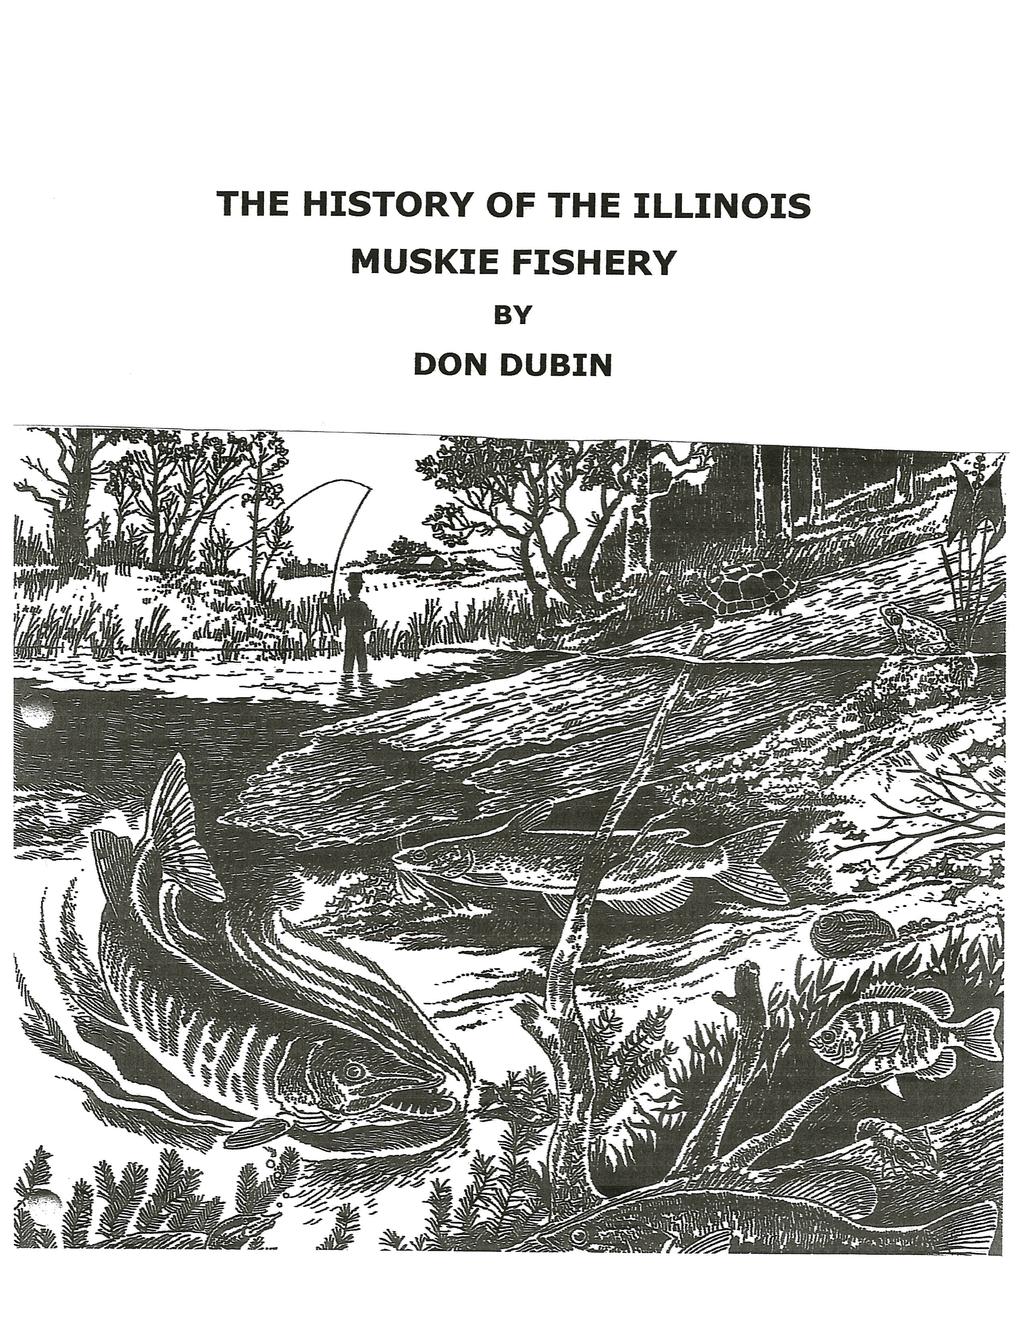 THE HISTORY OF THE ILLINOIS MUSKIE FISHERY BY DON DUBIN t - -~.